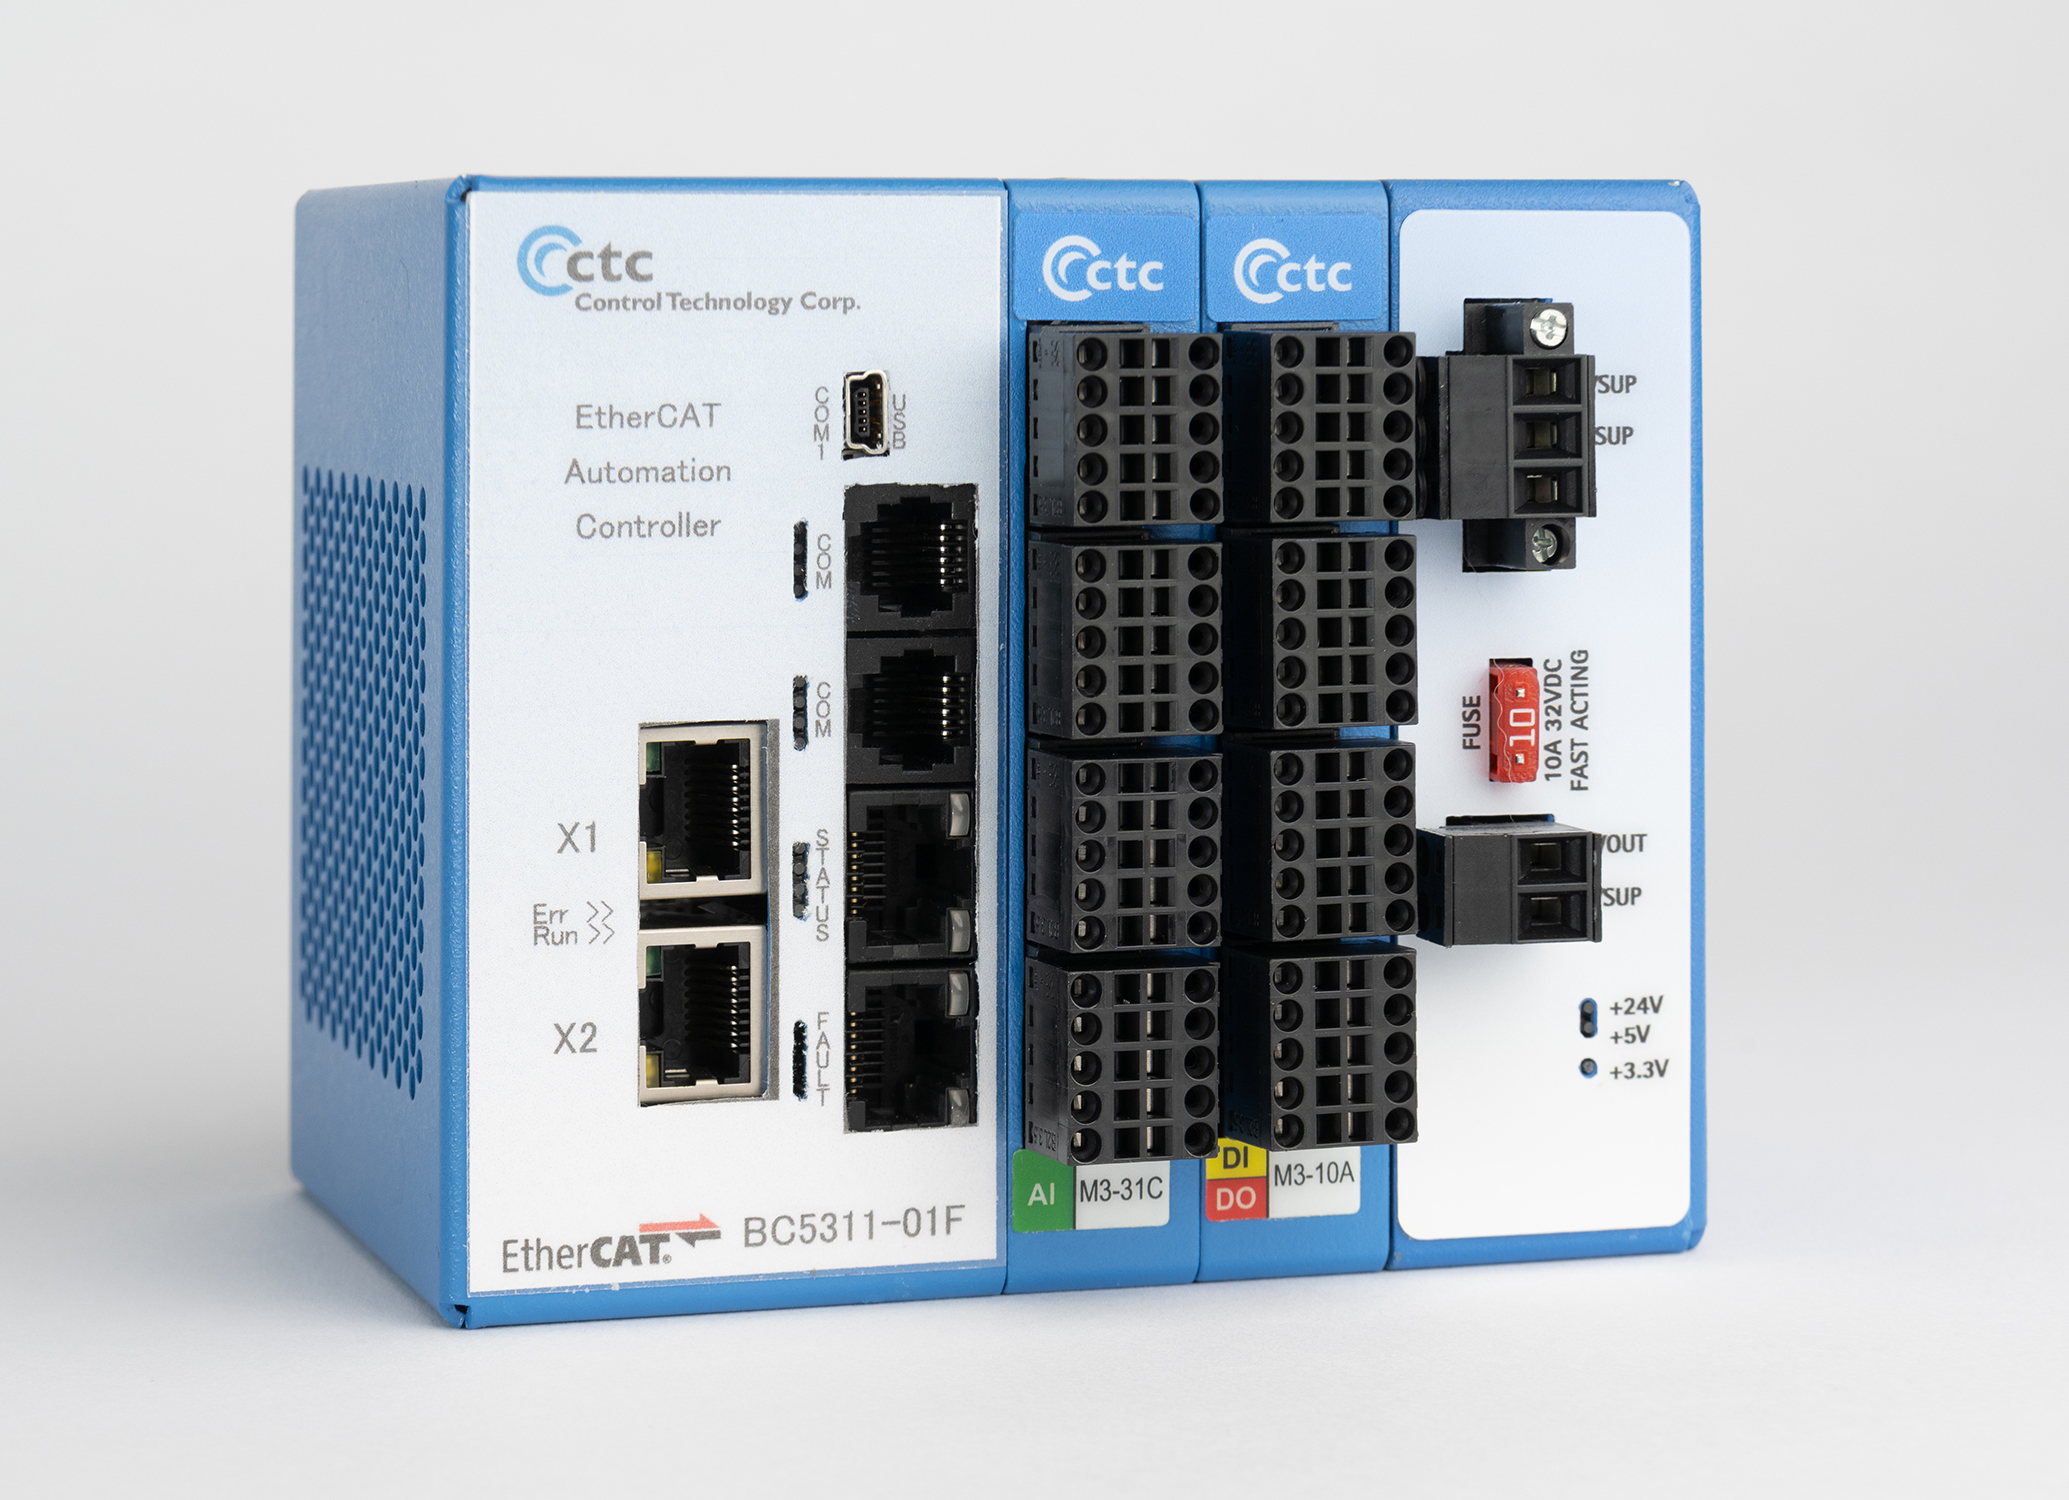 ECAT EtherCAT Coupler and Automation Controller with 2 slots.